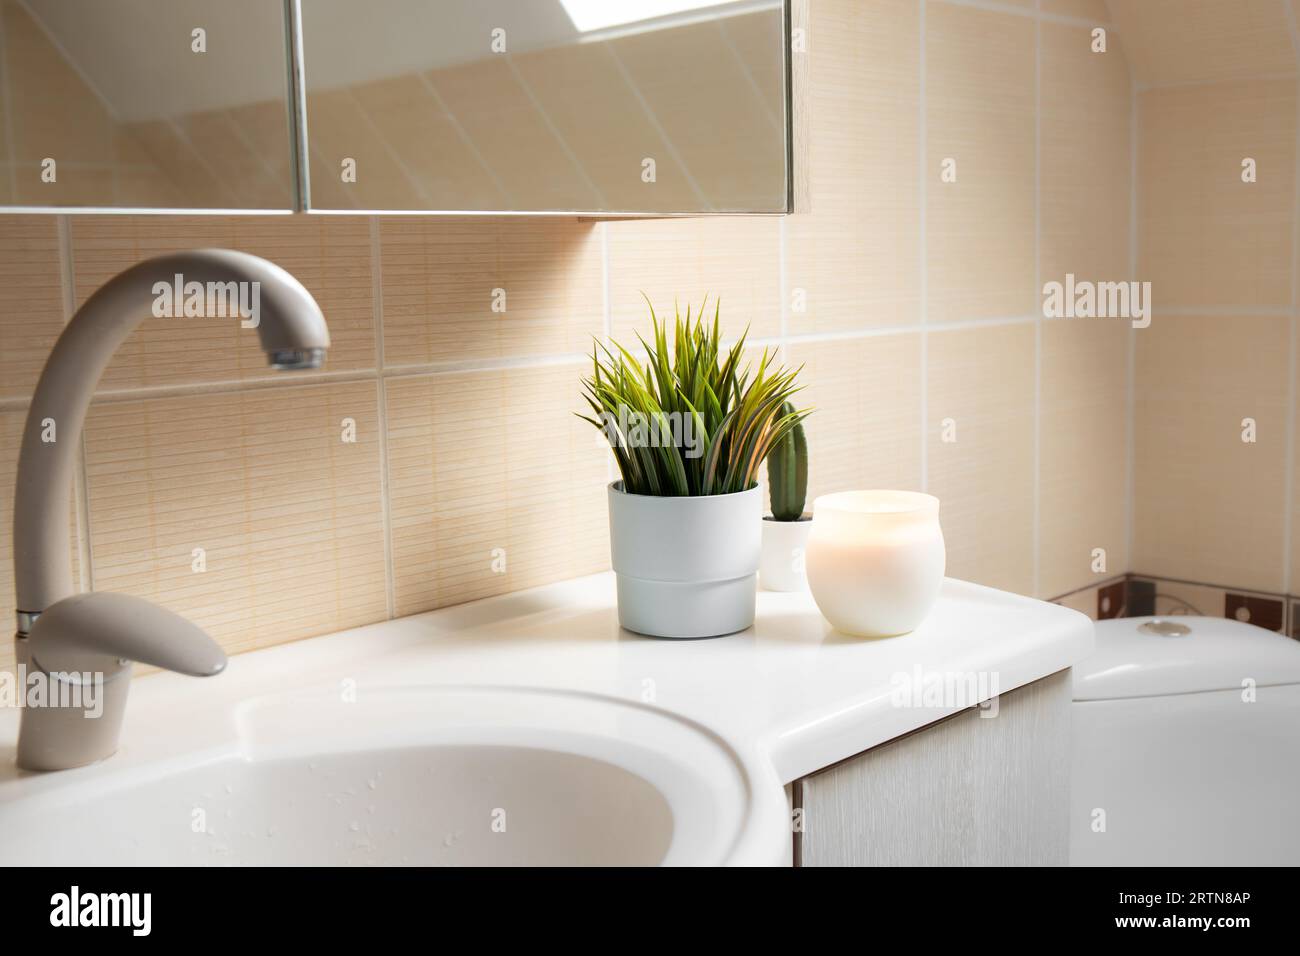 Using artificial flowers in bathroom interior at home. Potted flower plant on bathroom sink corner with candle burning. Stock Photo